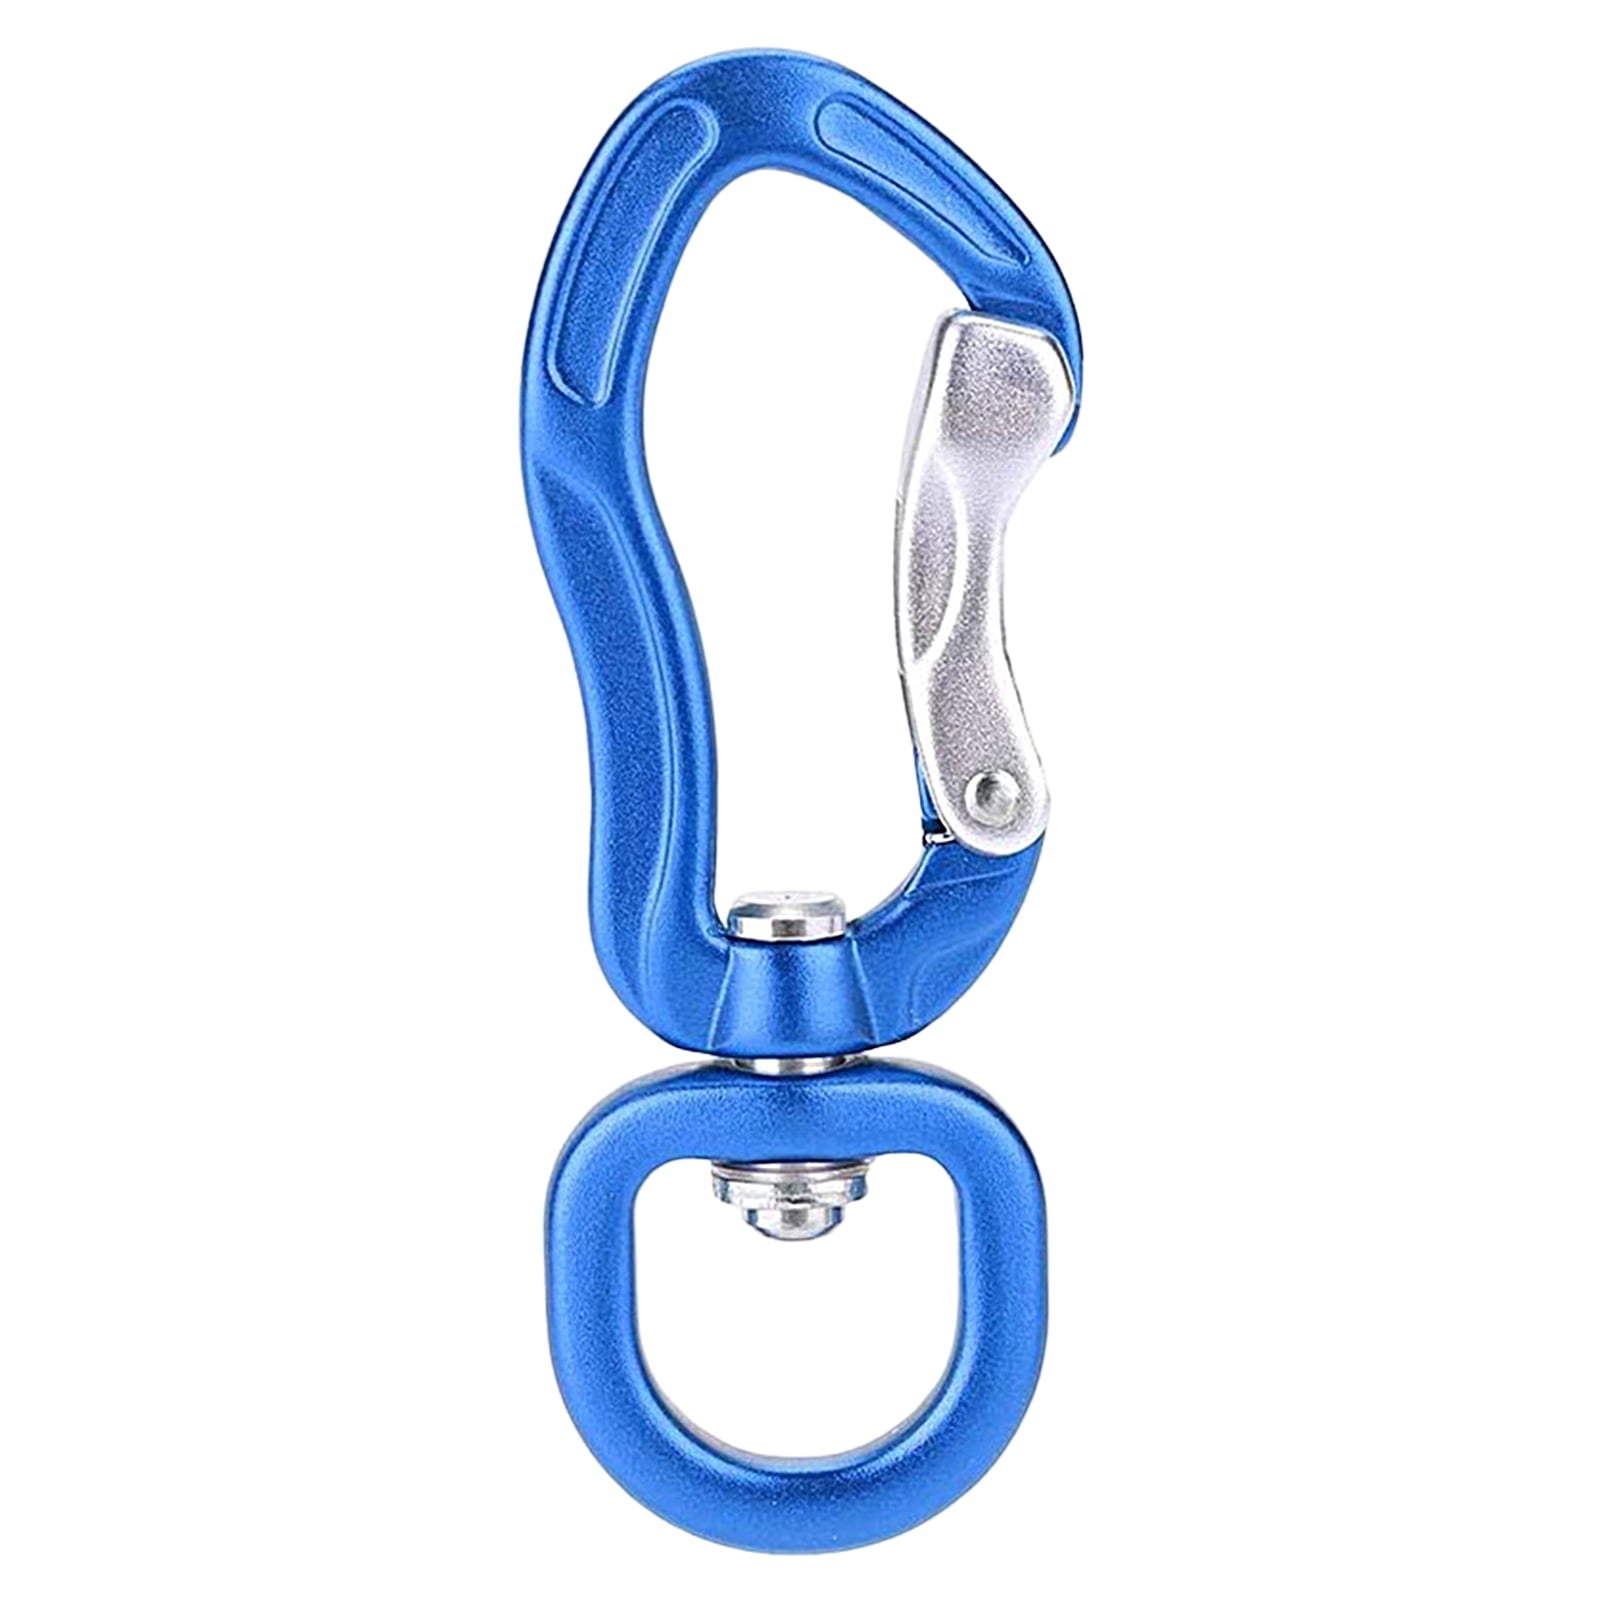 Carabiner-Heavy-Duty, 6 Pack 2.5” Small Carabiner-Clips with Strong  Spring-Stainless Steel Snap Hooks for Climbing Hiking Gym Keycháin and Dog  Leash